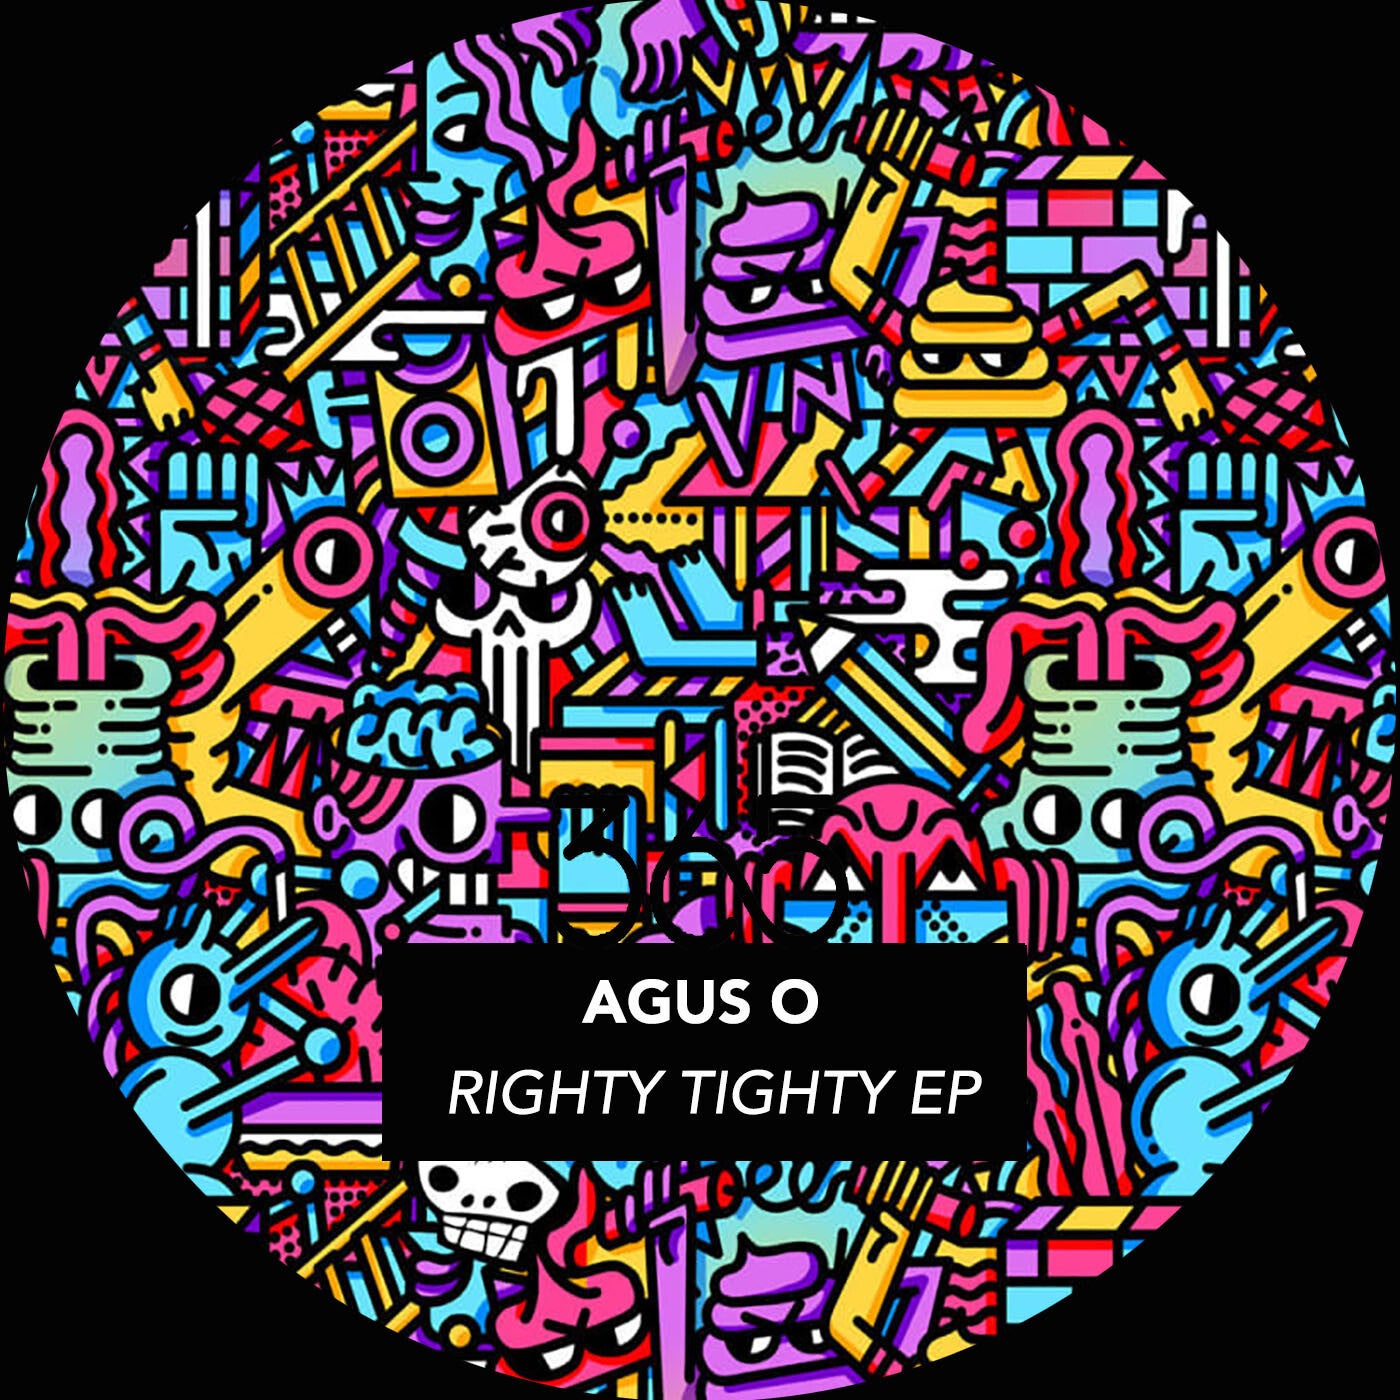 Righty Tighty EP